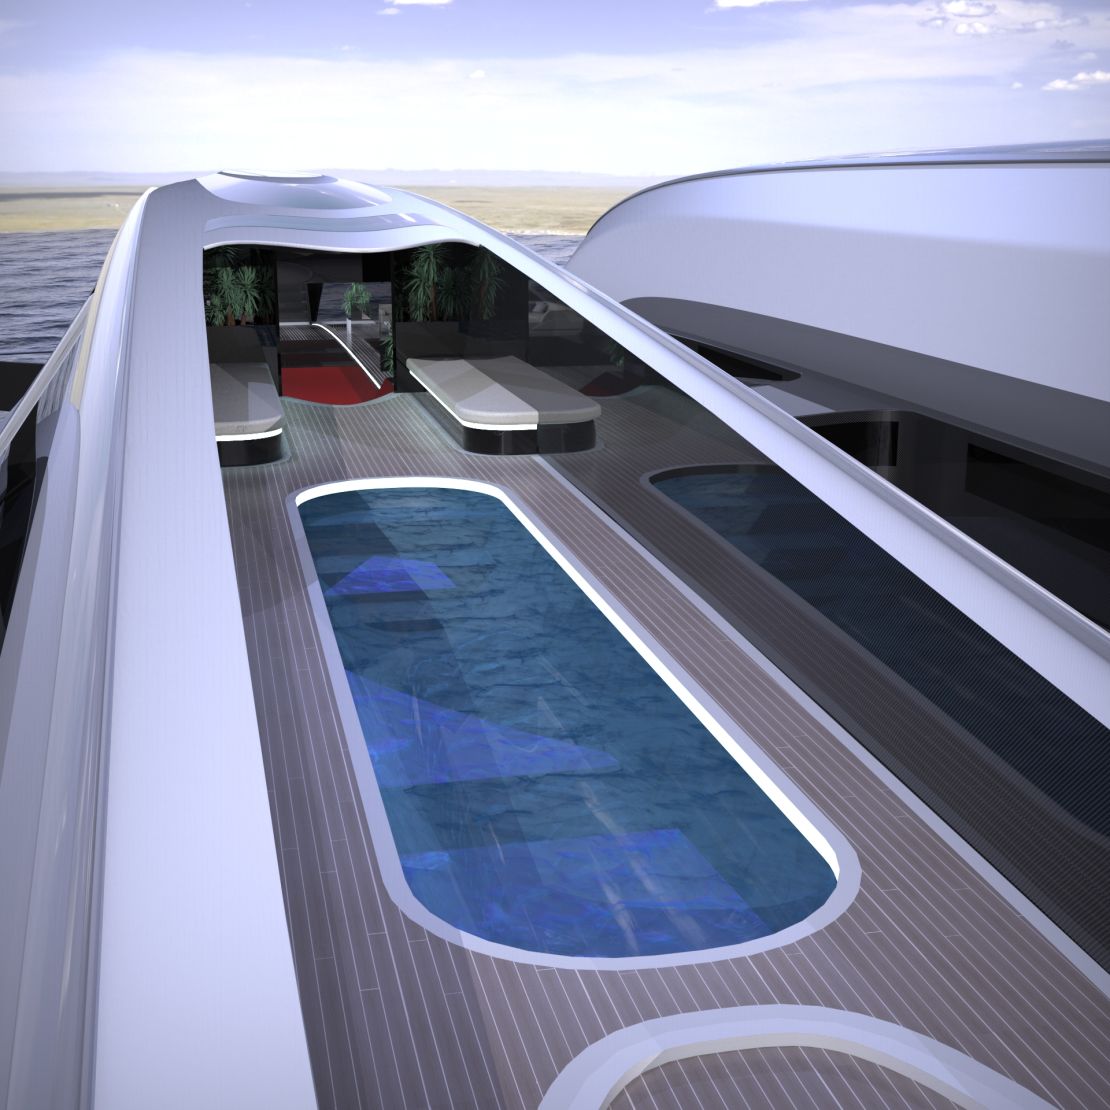 The central hull features a spacious living room and a swimming pool.